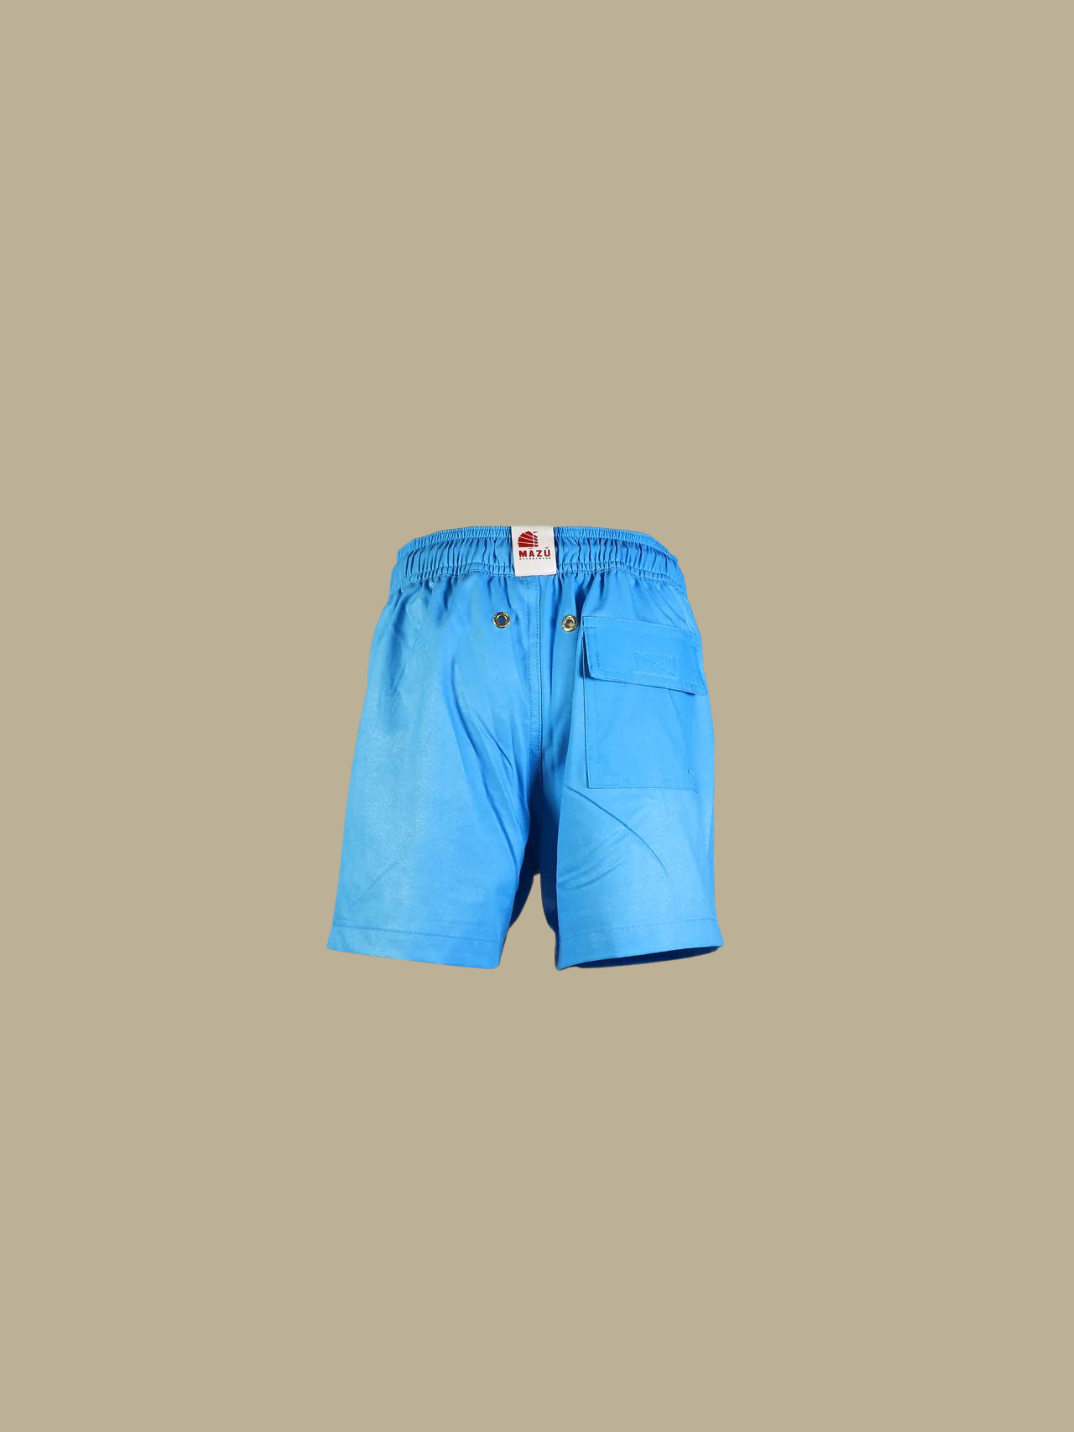 boys swim shorts swim trunks sustainable fashion made from recycled plastic bottles tropical junk boat Hong Kong-inspired